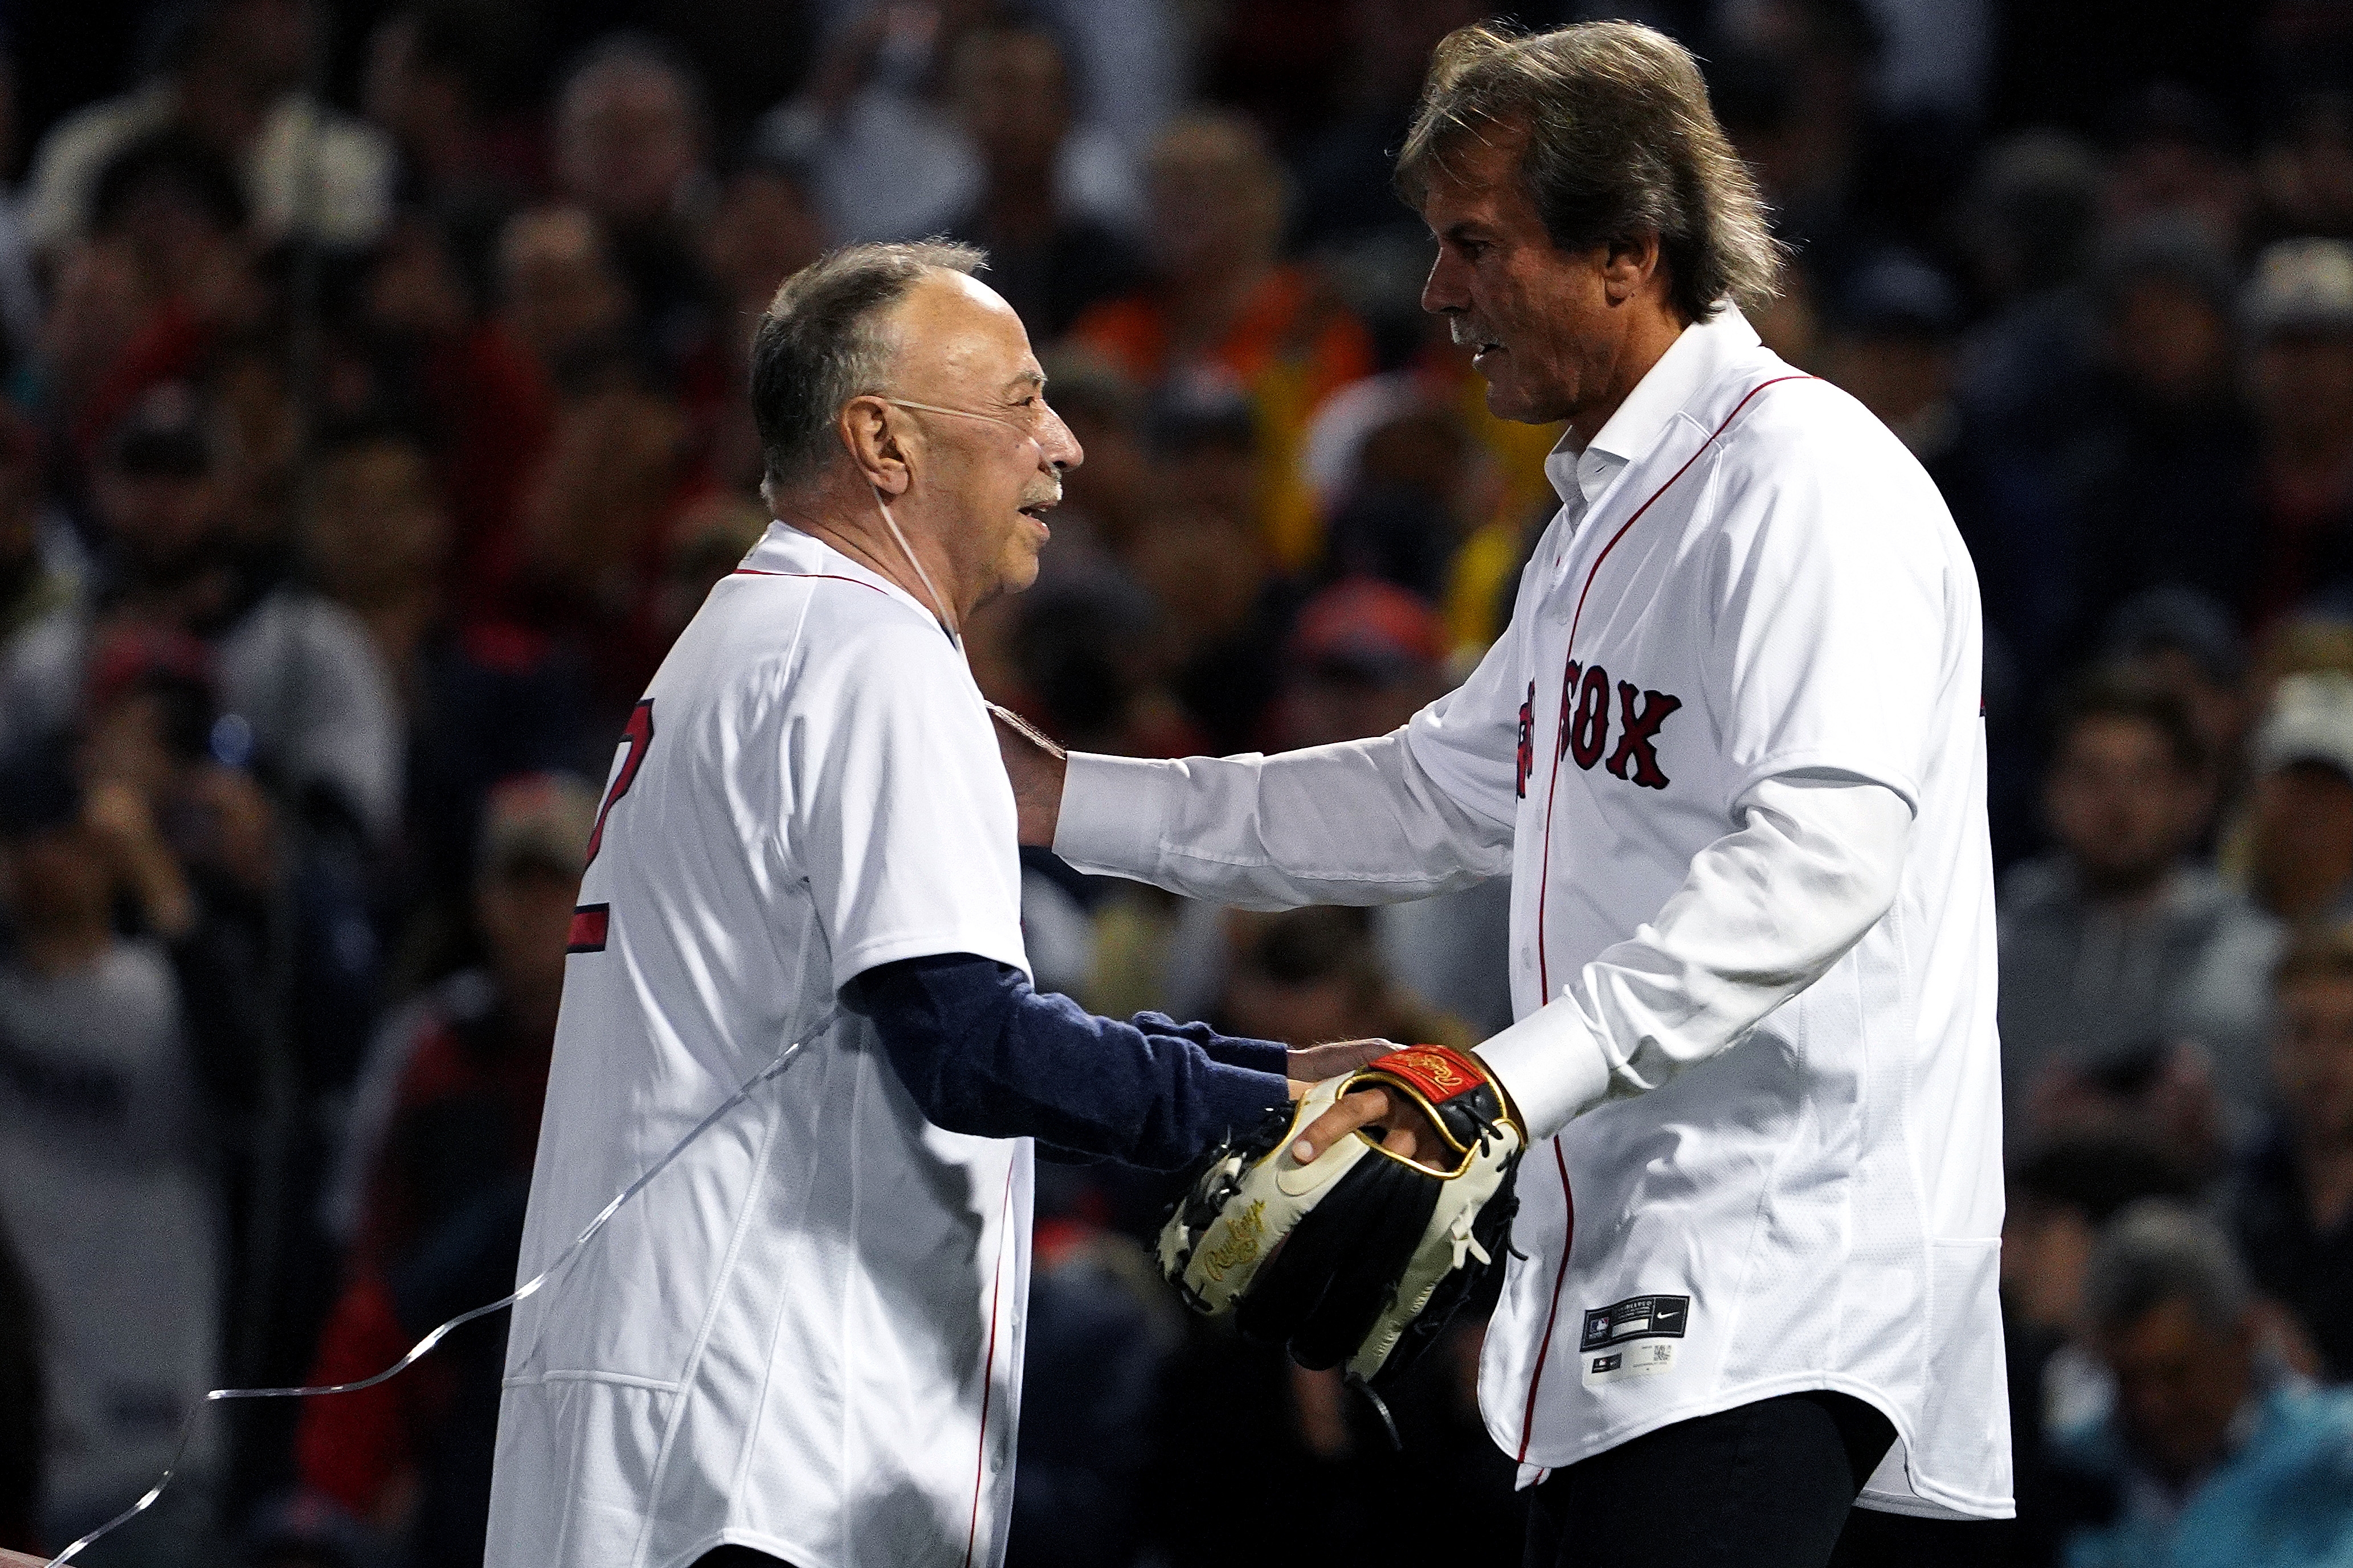 I loved his laugh.' Dennis Eckersley, Don Orsillo reflect on what it was  like working with Jerry Remy every day - The Boston Globe